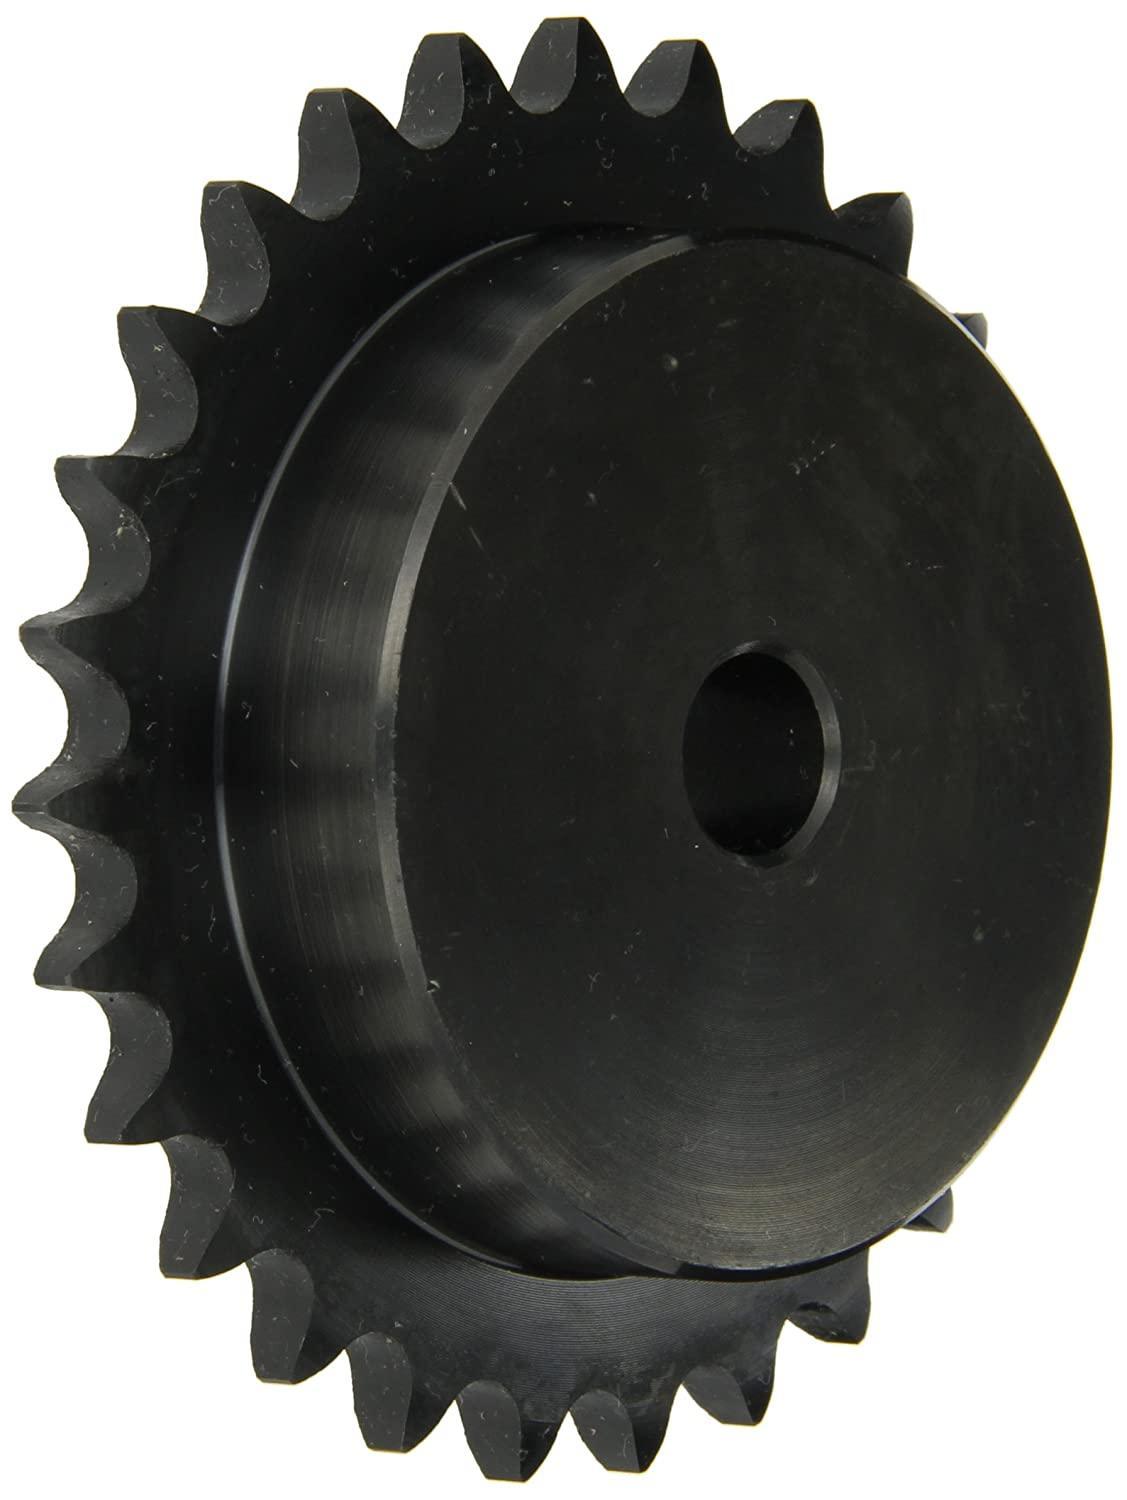 50B20H Roller Chain Sprocket With Stock Bore - Forces Inc